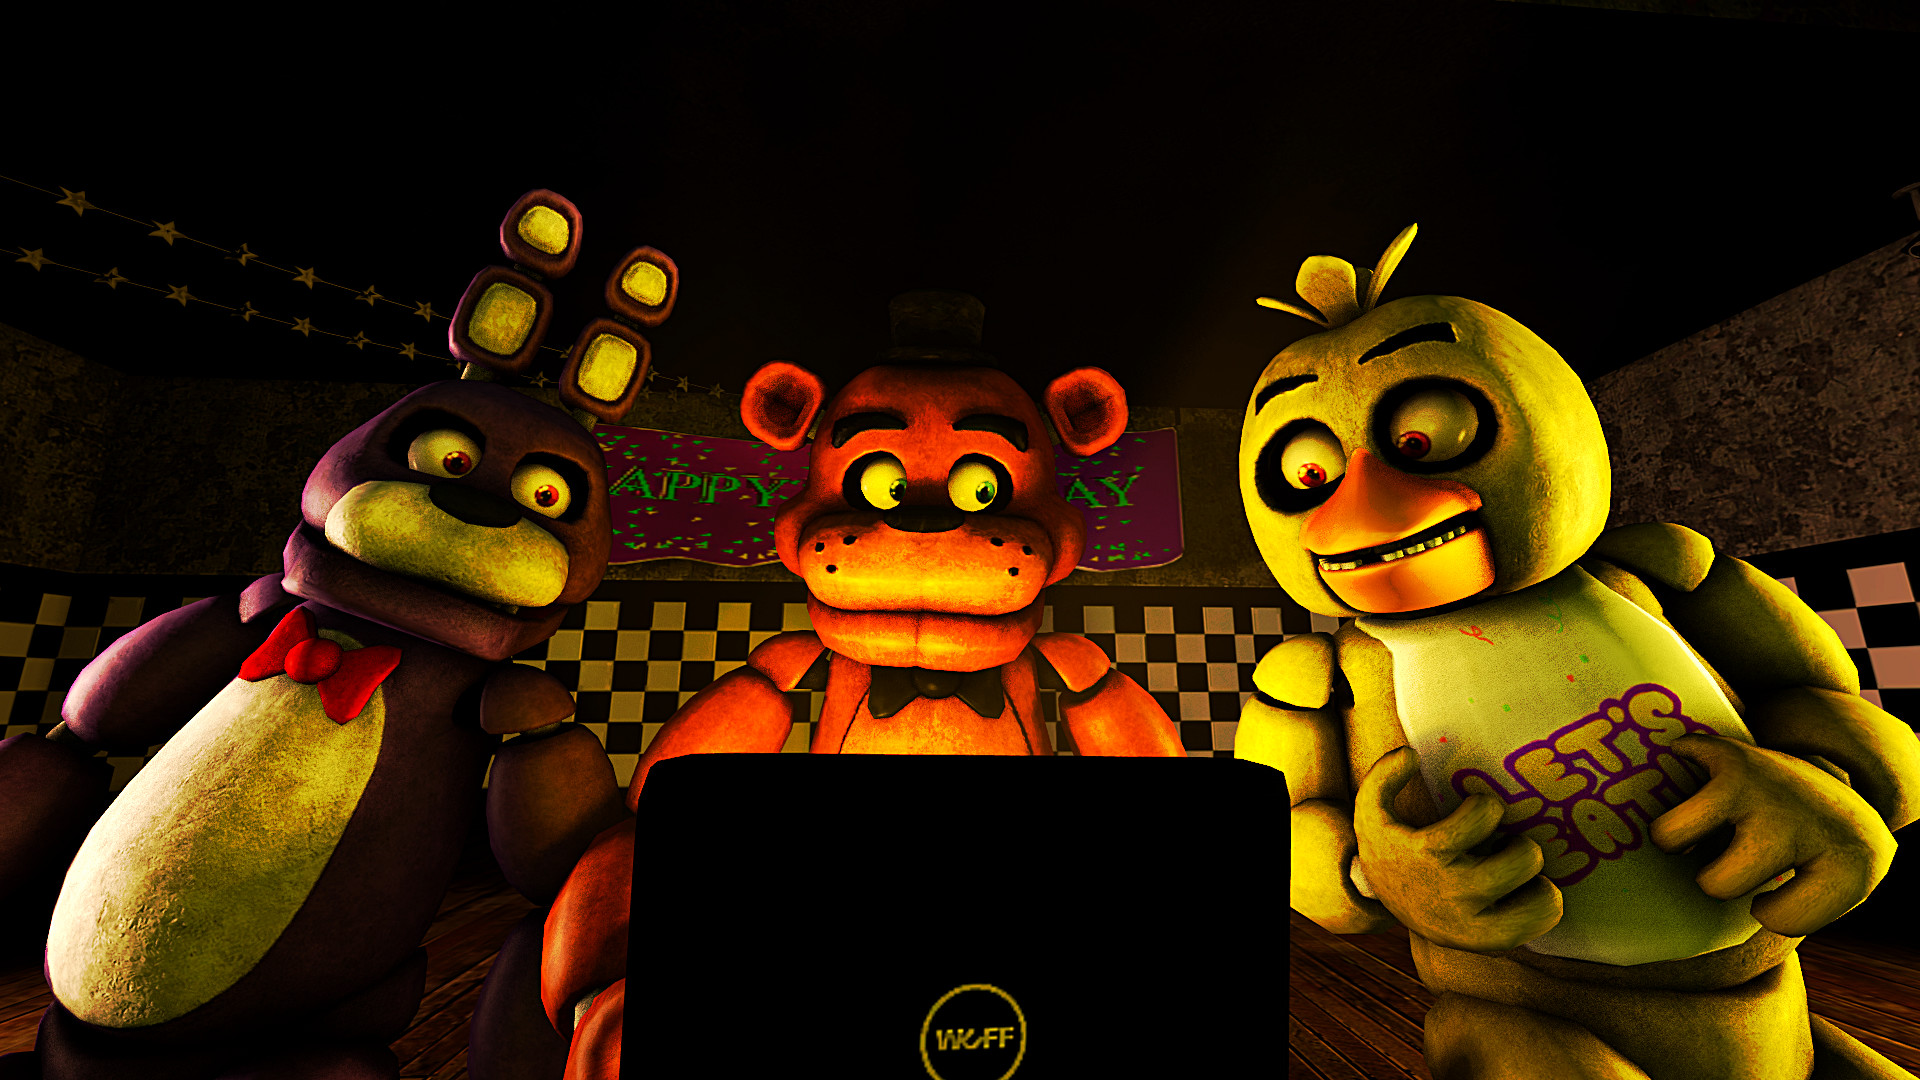 1920x1080 ... Looking at the Chica FNAF 4 teaser by Ionyen